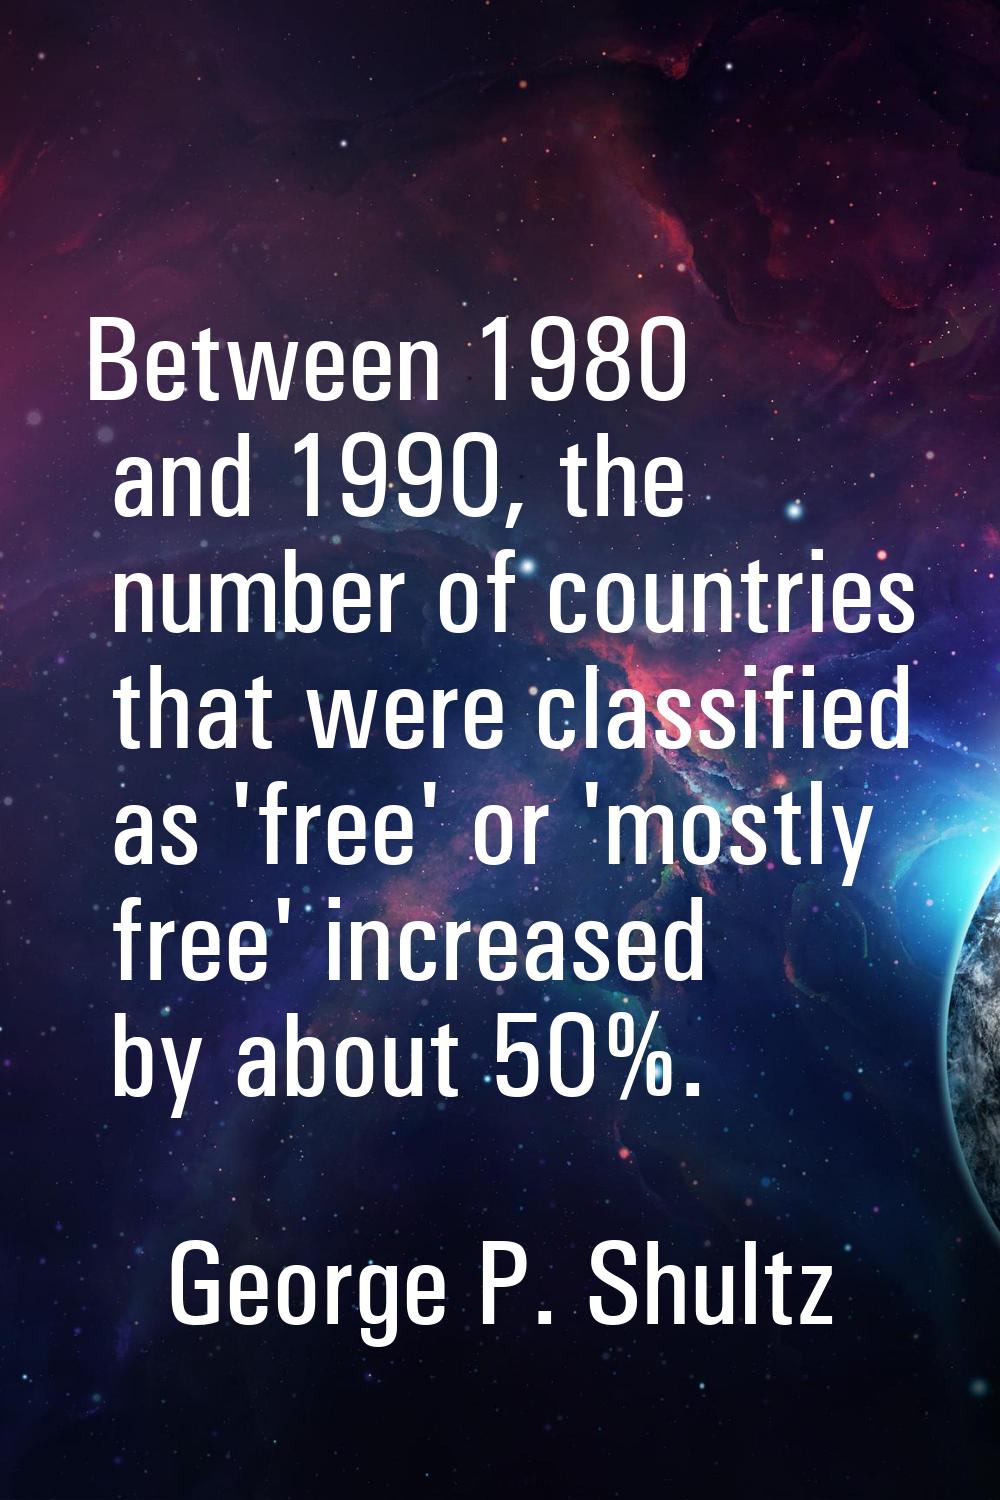 Between 1980 and 1990, the number of countries that were classified as 'free' or 'mostly free' incr